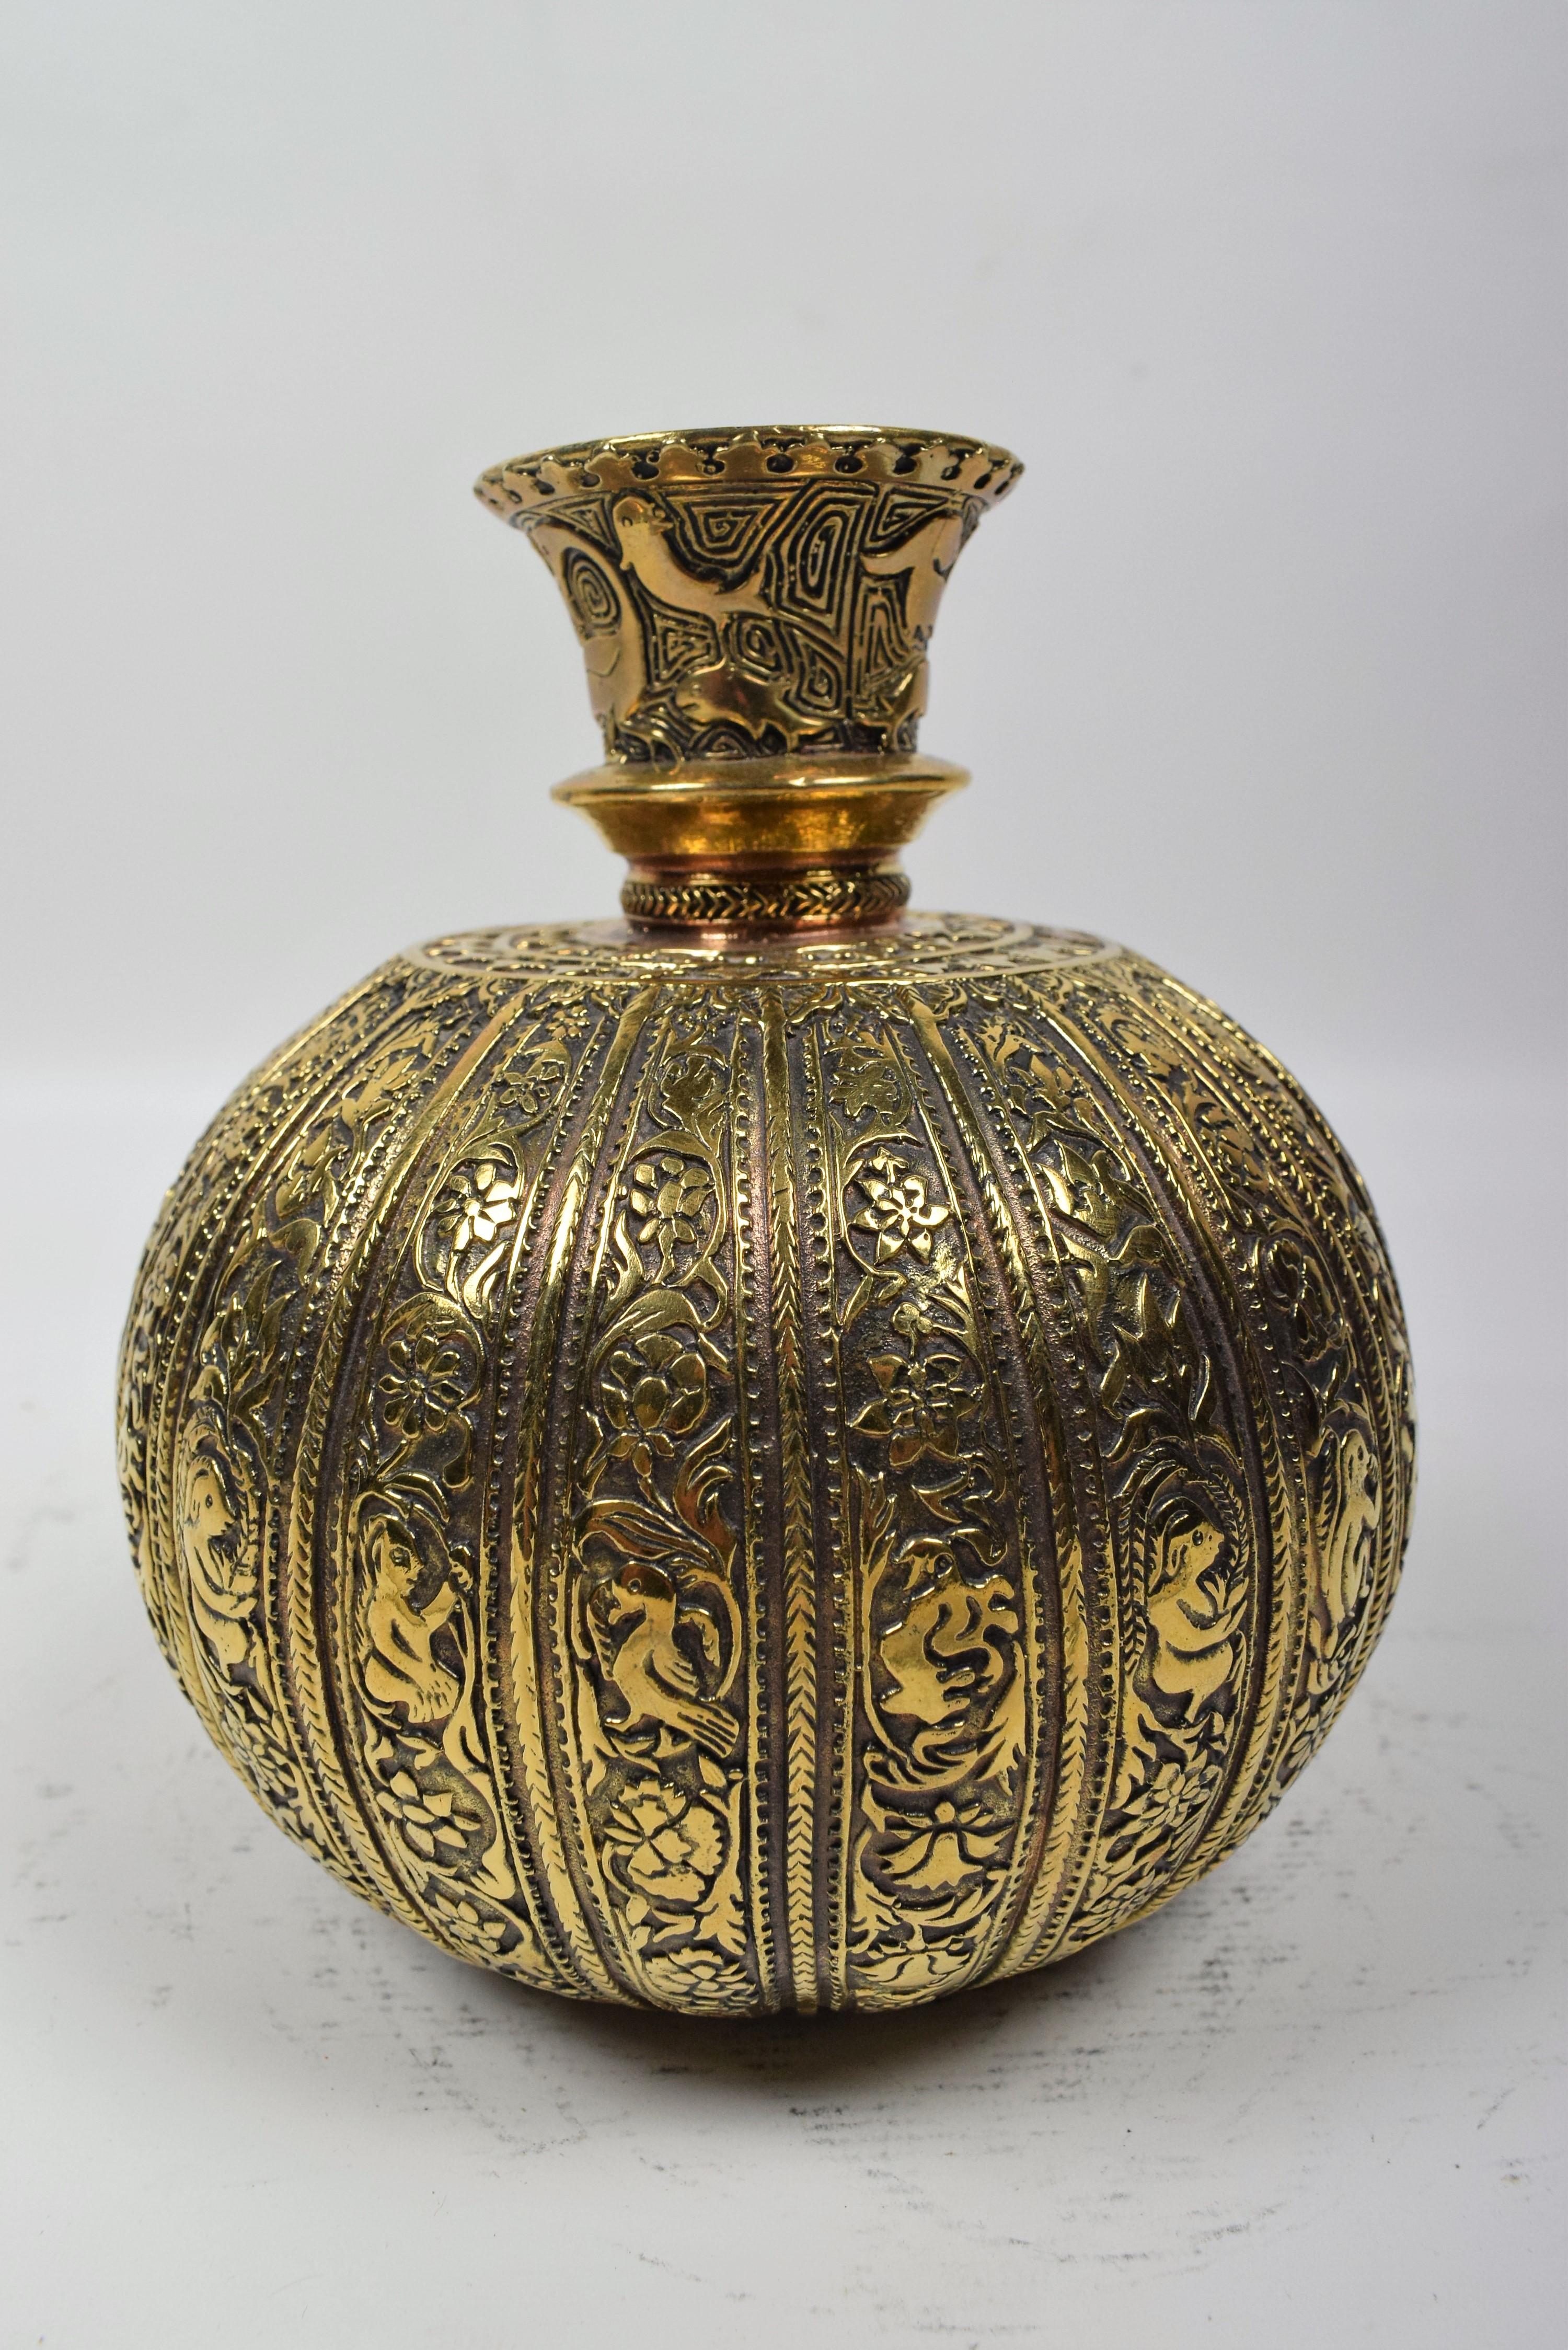 The brass Mughal hookah features a beautifully engraved brass base adorned with intricate floral, geometric, and animal figure motifs. The base is a work of art, showcasing the exquisite craftsmanship and attention to detail characteristic of Mughal